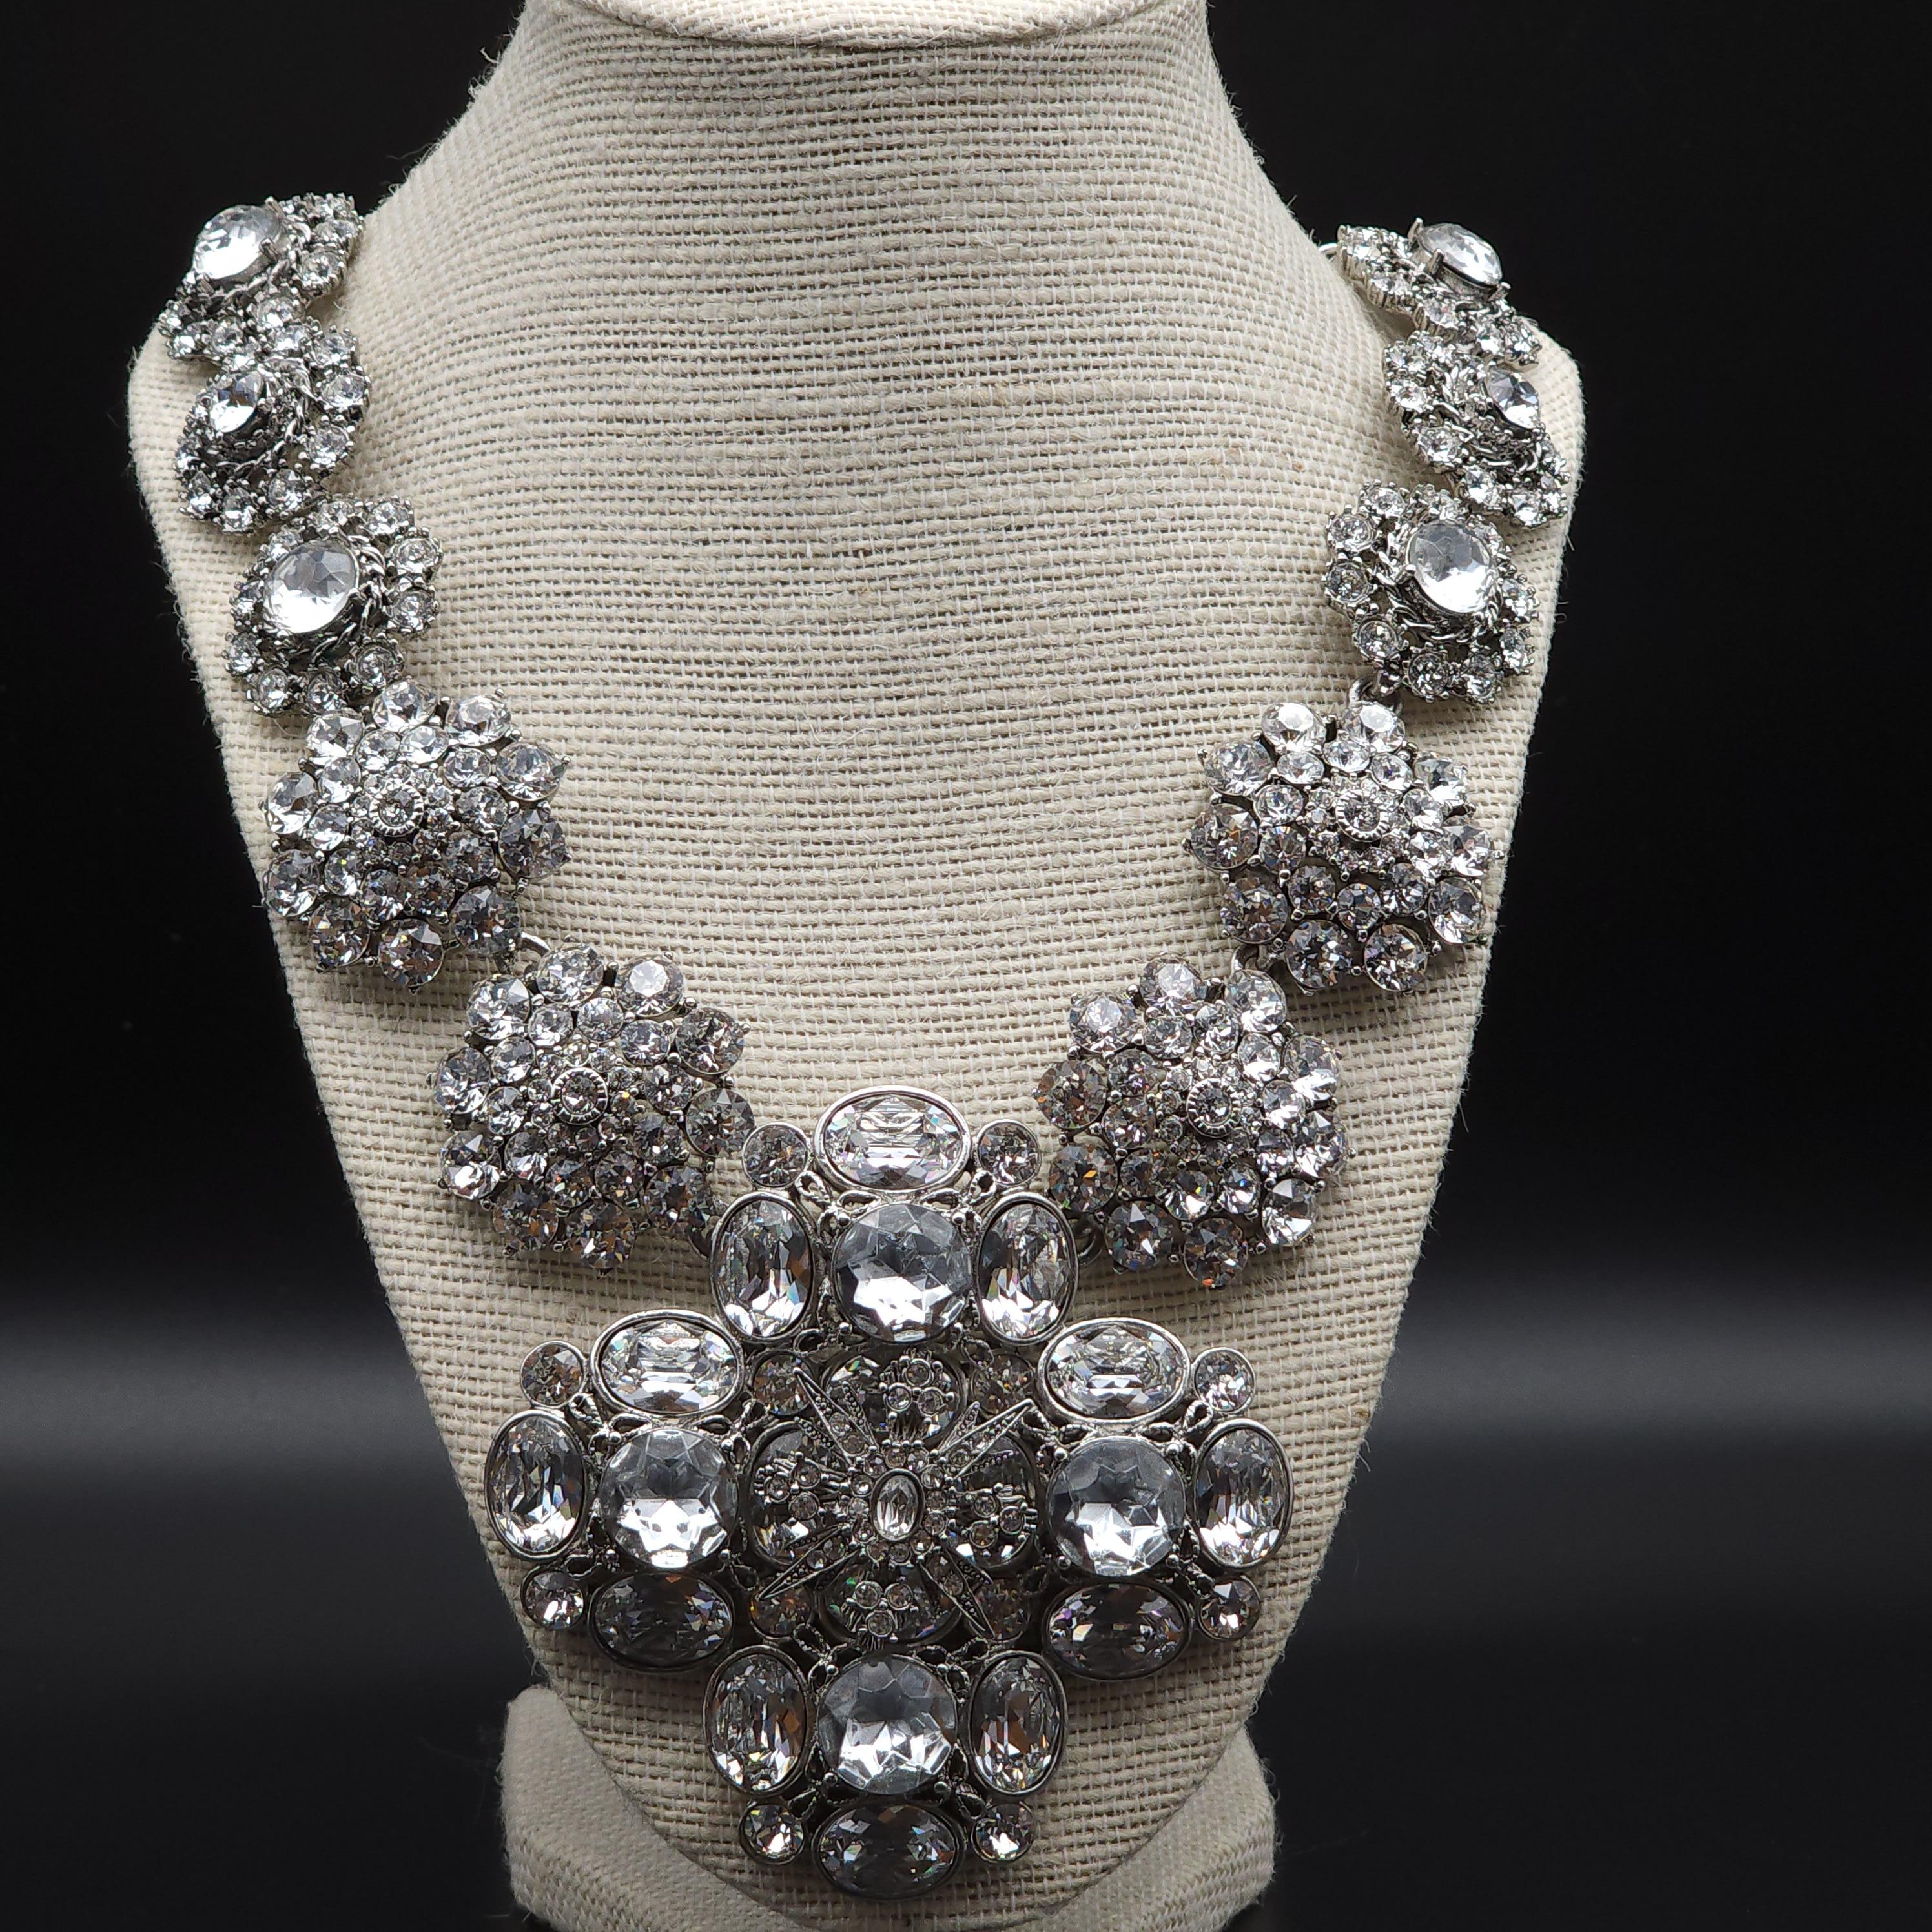 jeweled collar necklace